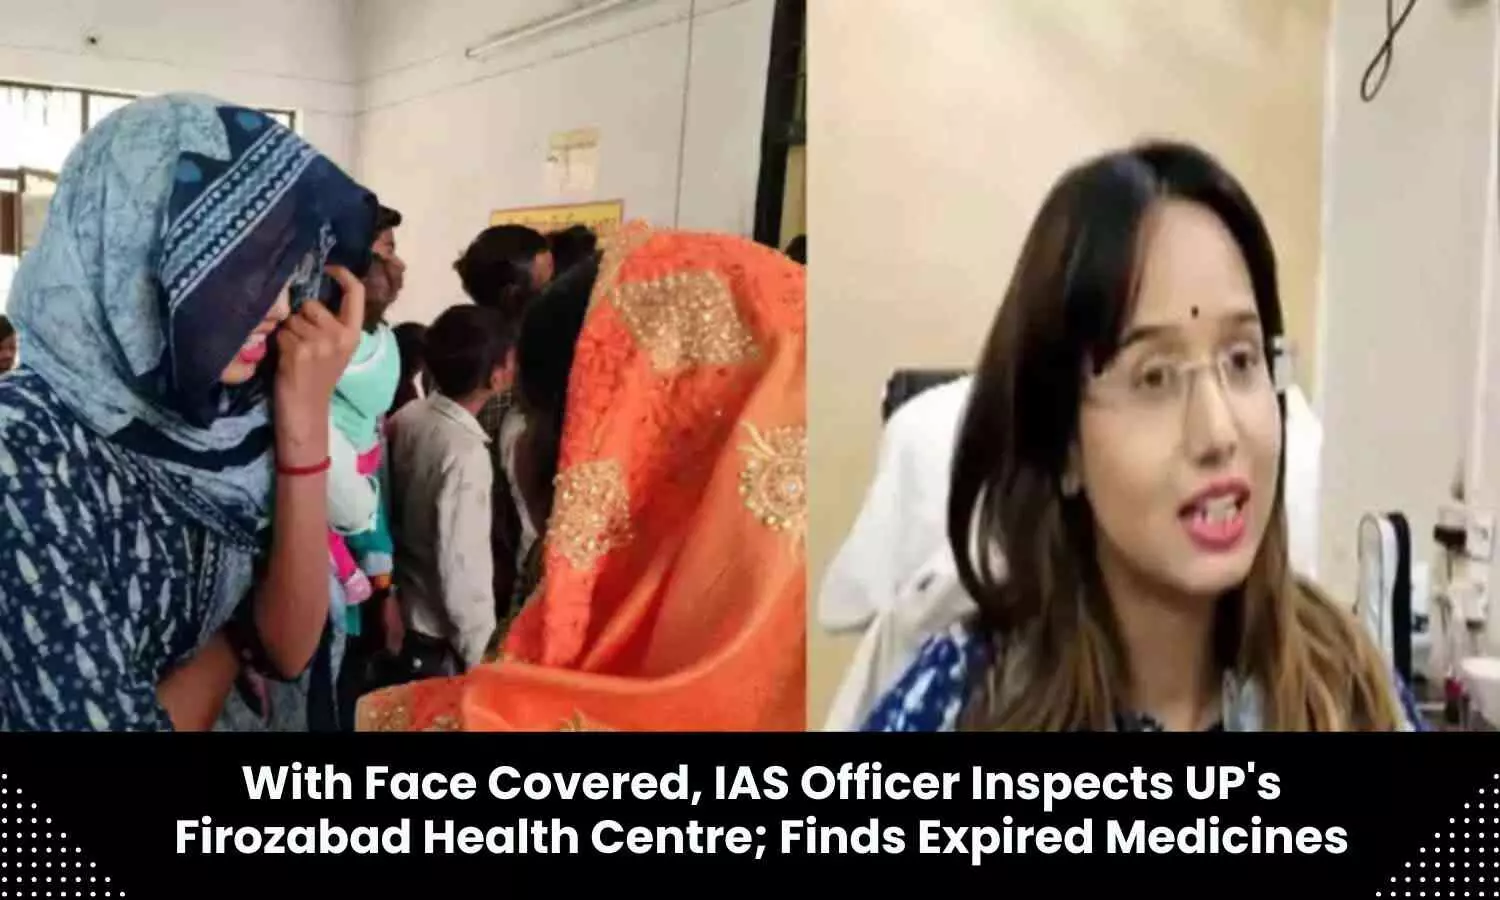 In Veil, IAS Officer inspects Firozabad Health Centre; Finds Expired Medicines